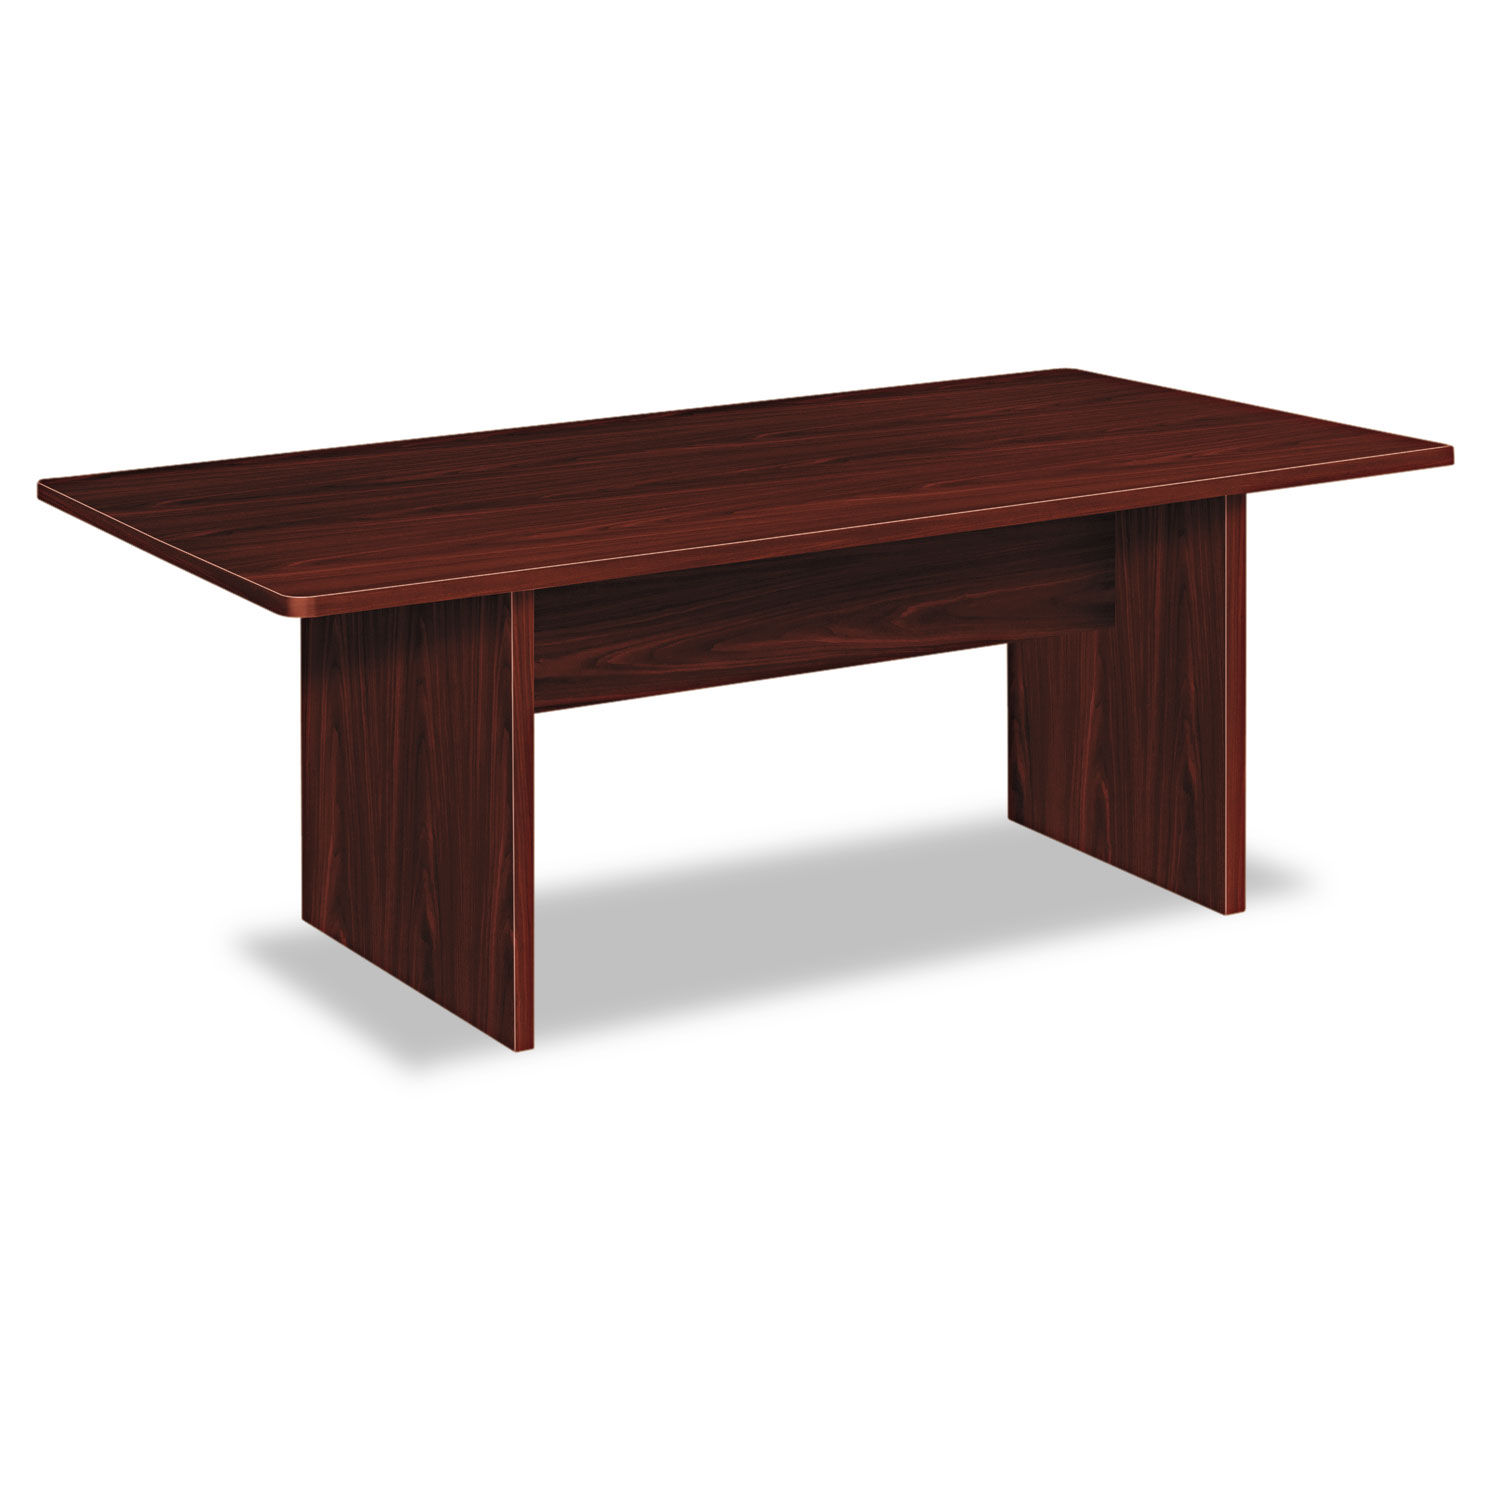 BL Laminate Series Rectangular Conference Table 72w x 36d x 29 1/2h, Mahogany